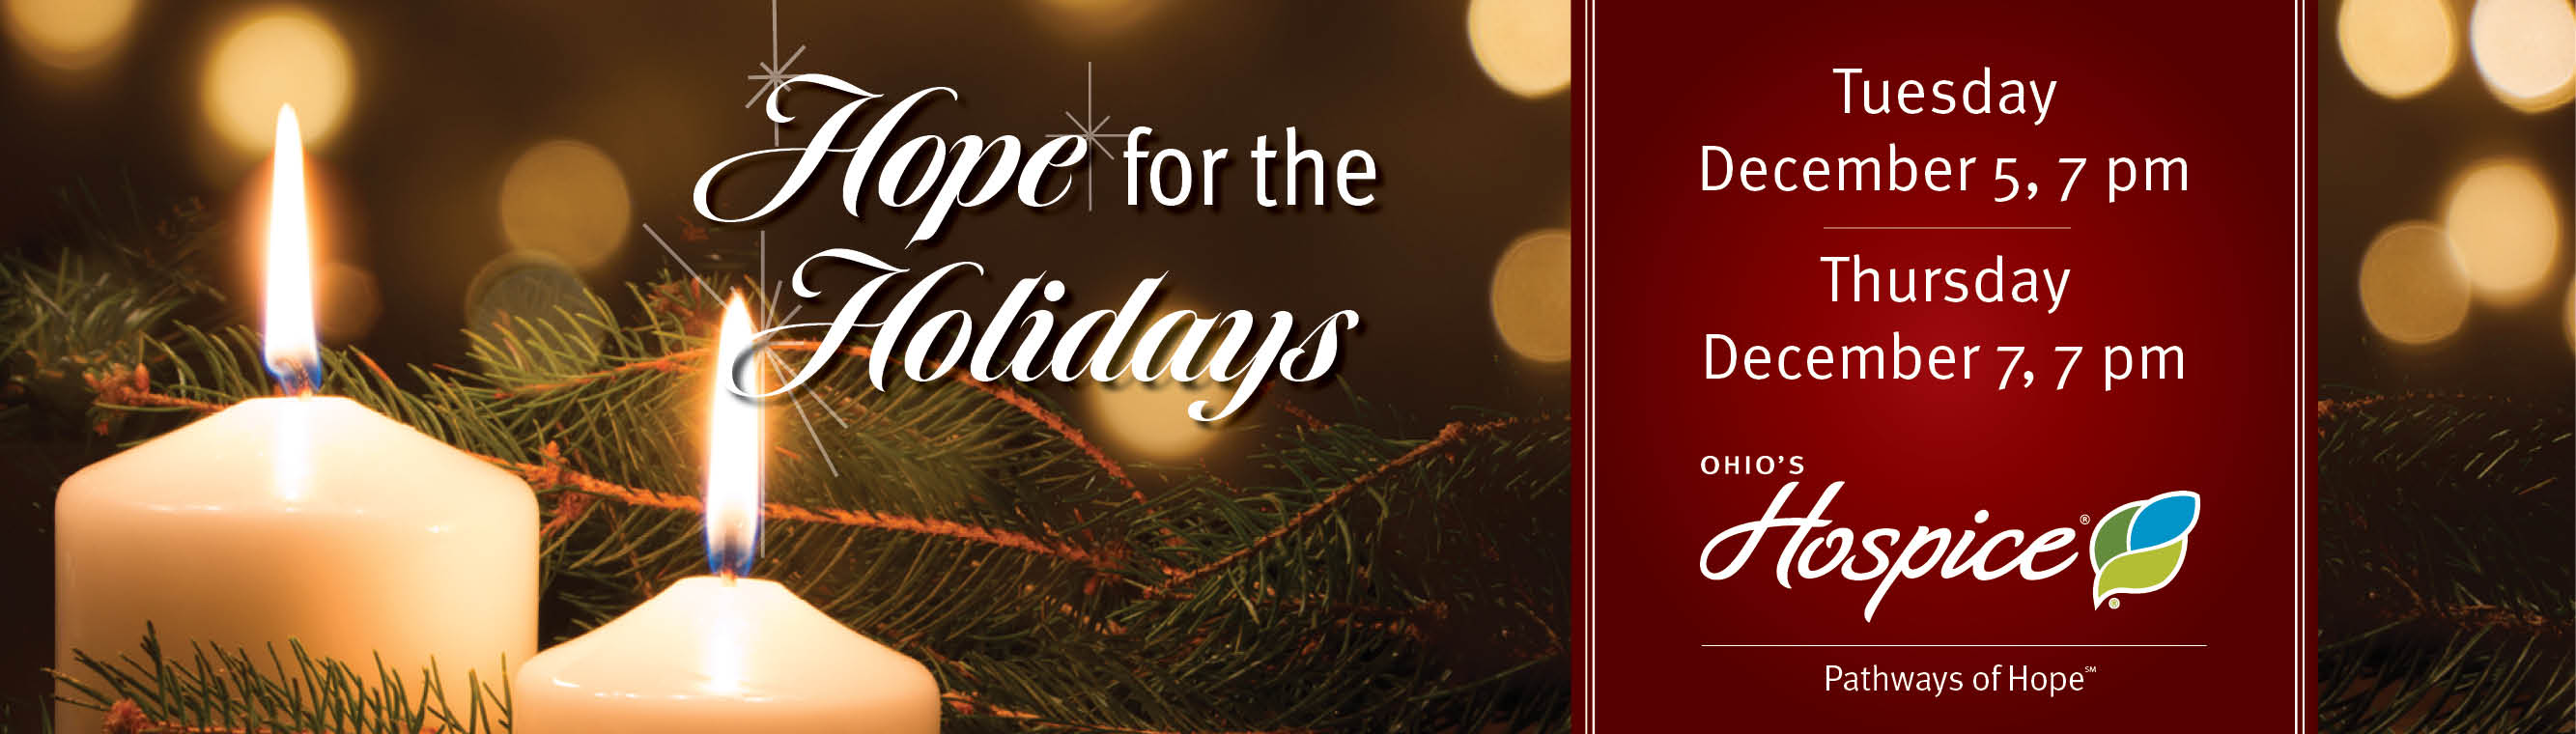 Hope for the Holidays. Tuesday, December 5, 7 pm and Thursday, December 7, 7 pm. Ohio's Hospice Pathways of Hope